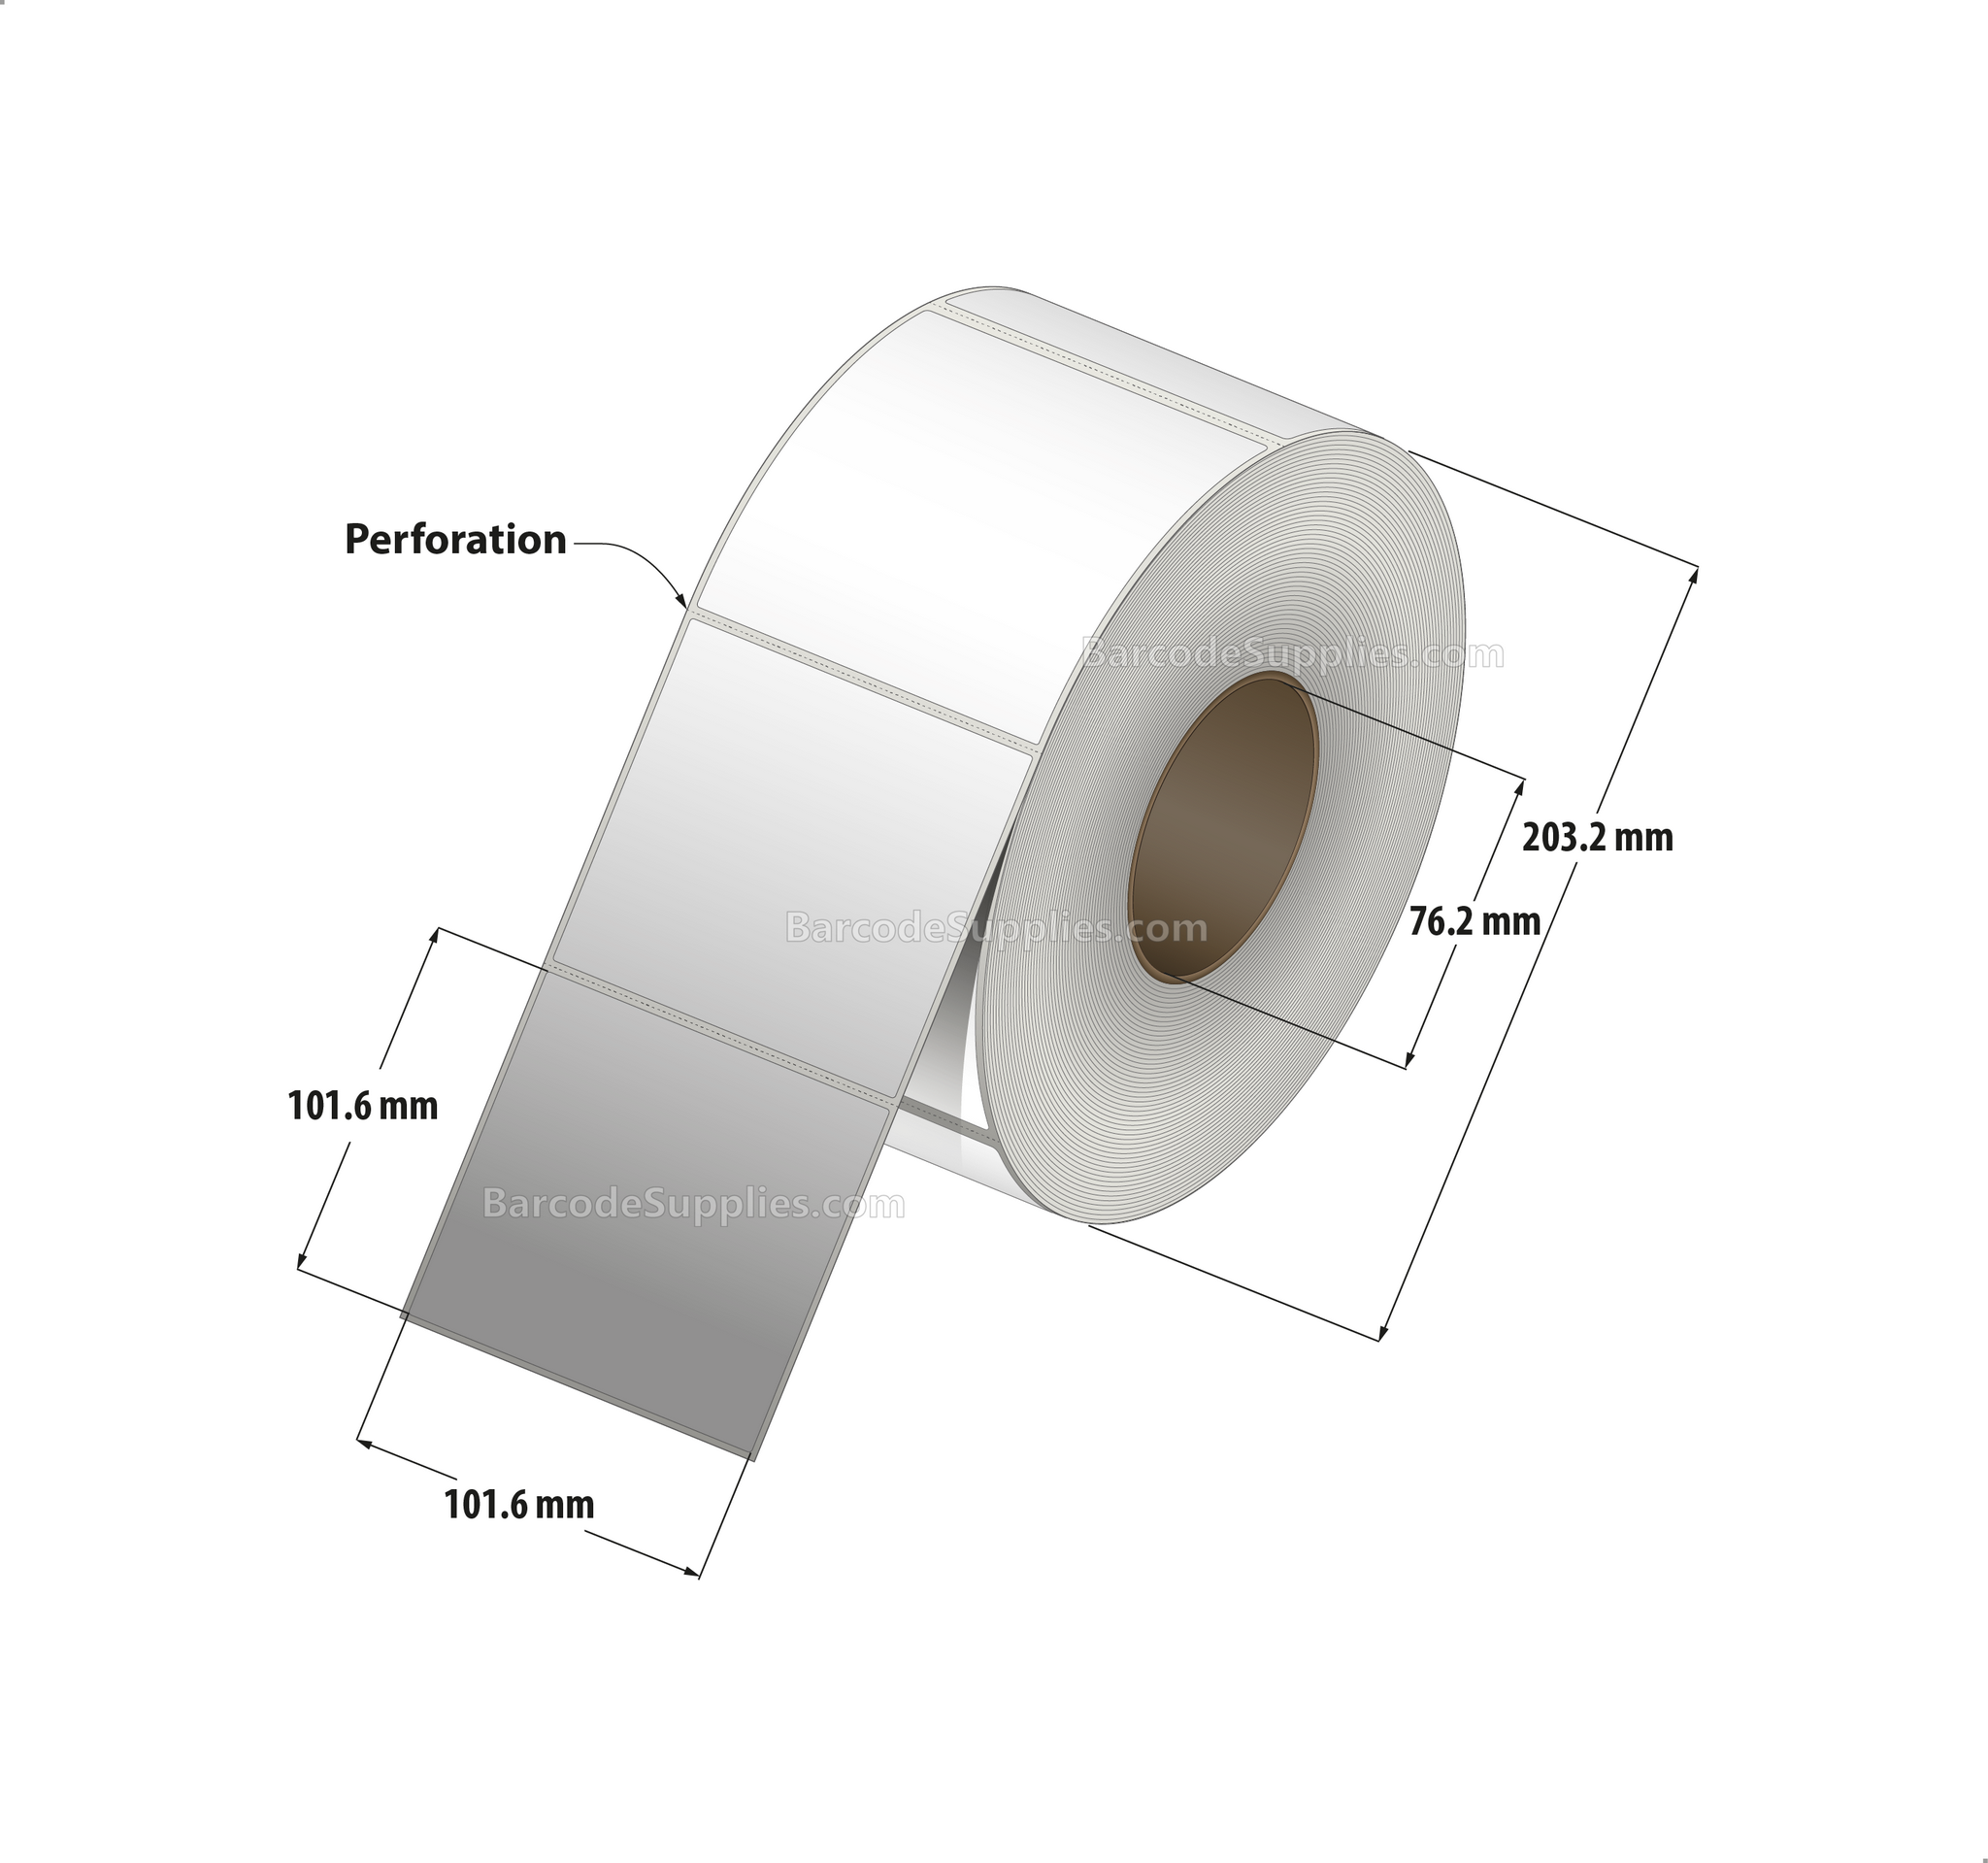 4 x 4 Thermal Transfer White Labels With Rubber Adhesive - Perforated - 1500 Labels Per Roll - Carton Of 4 Rolls - 6000 Labels Total - MPN: CTT400400-3P